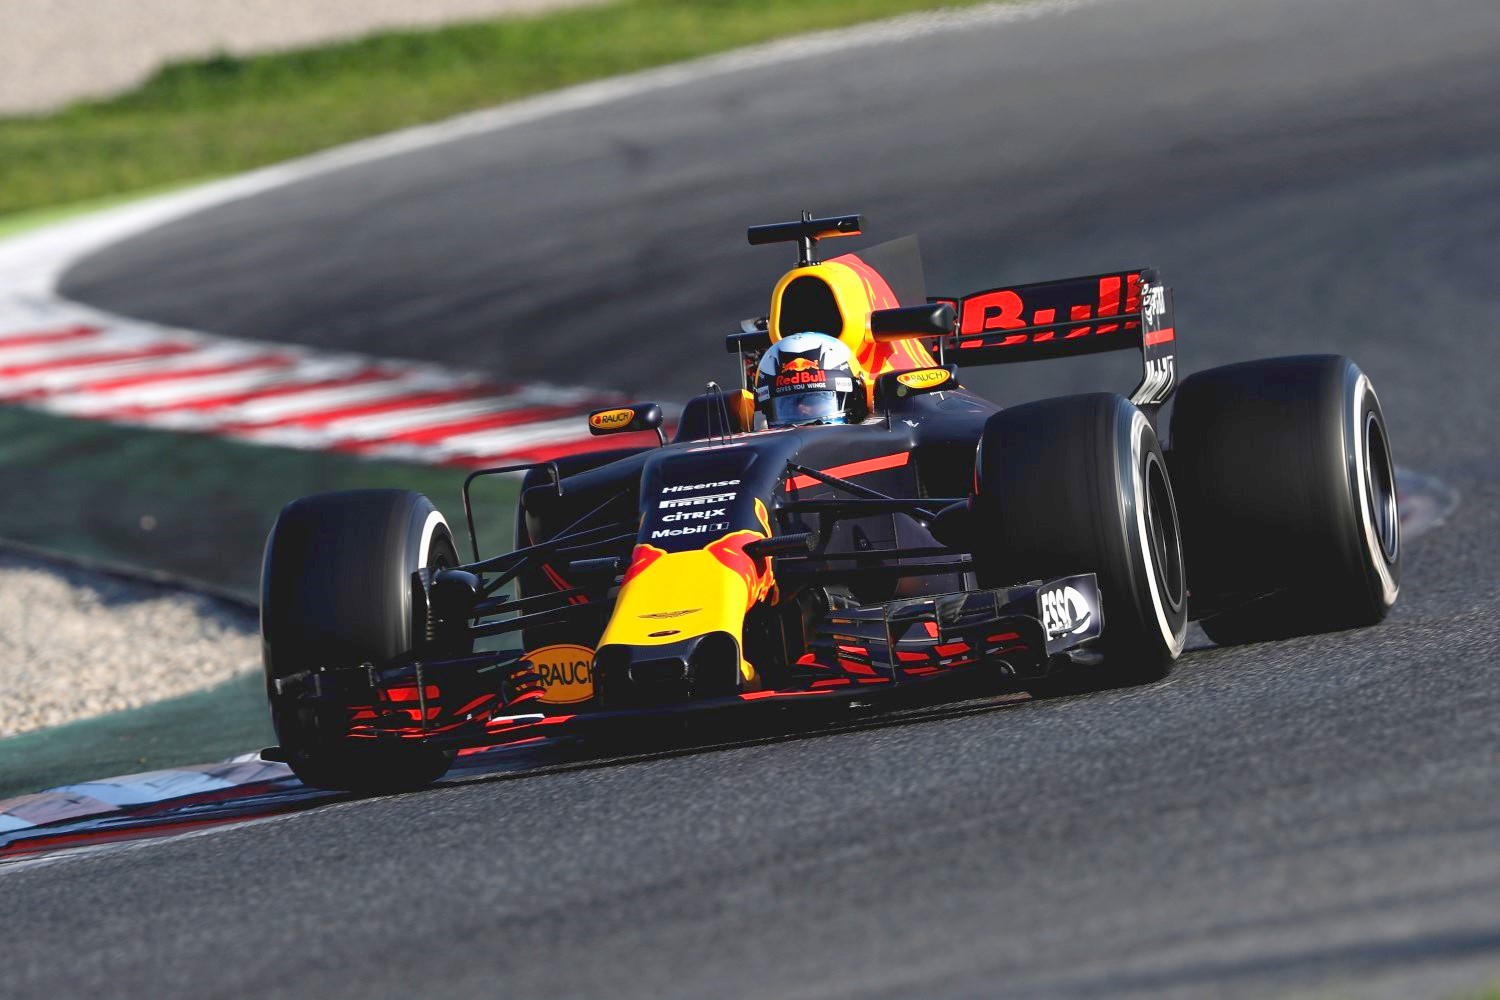 So far in testing the Red Bull has not been as fast as Mercedes or Ferrari